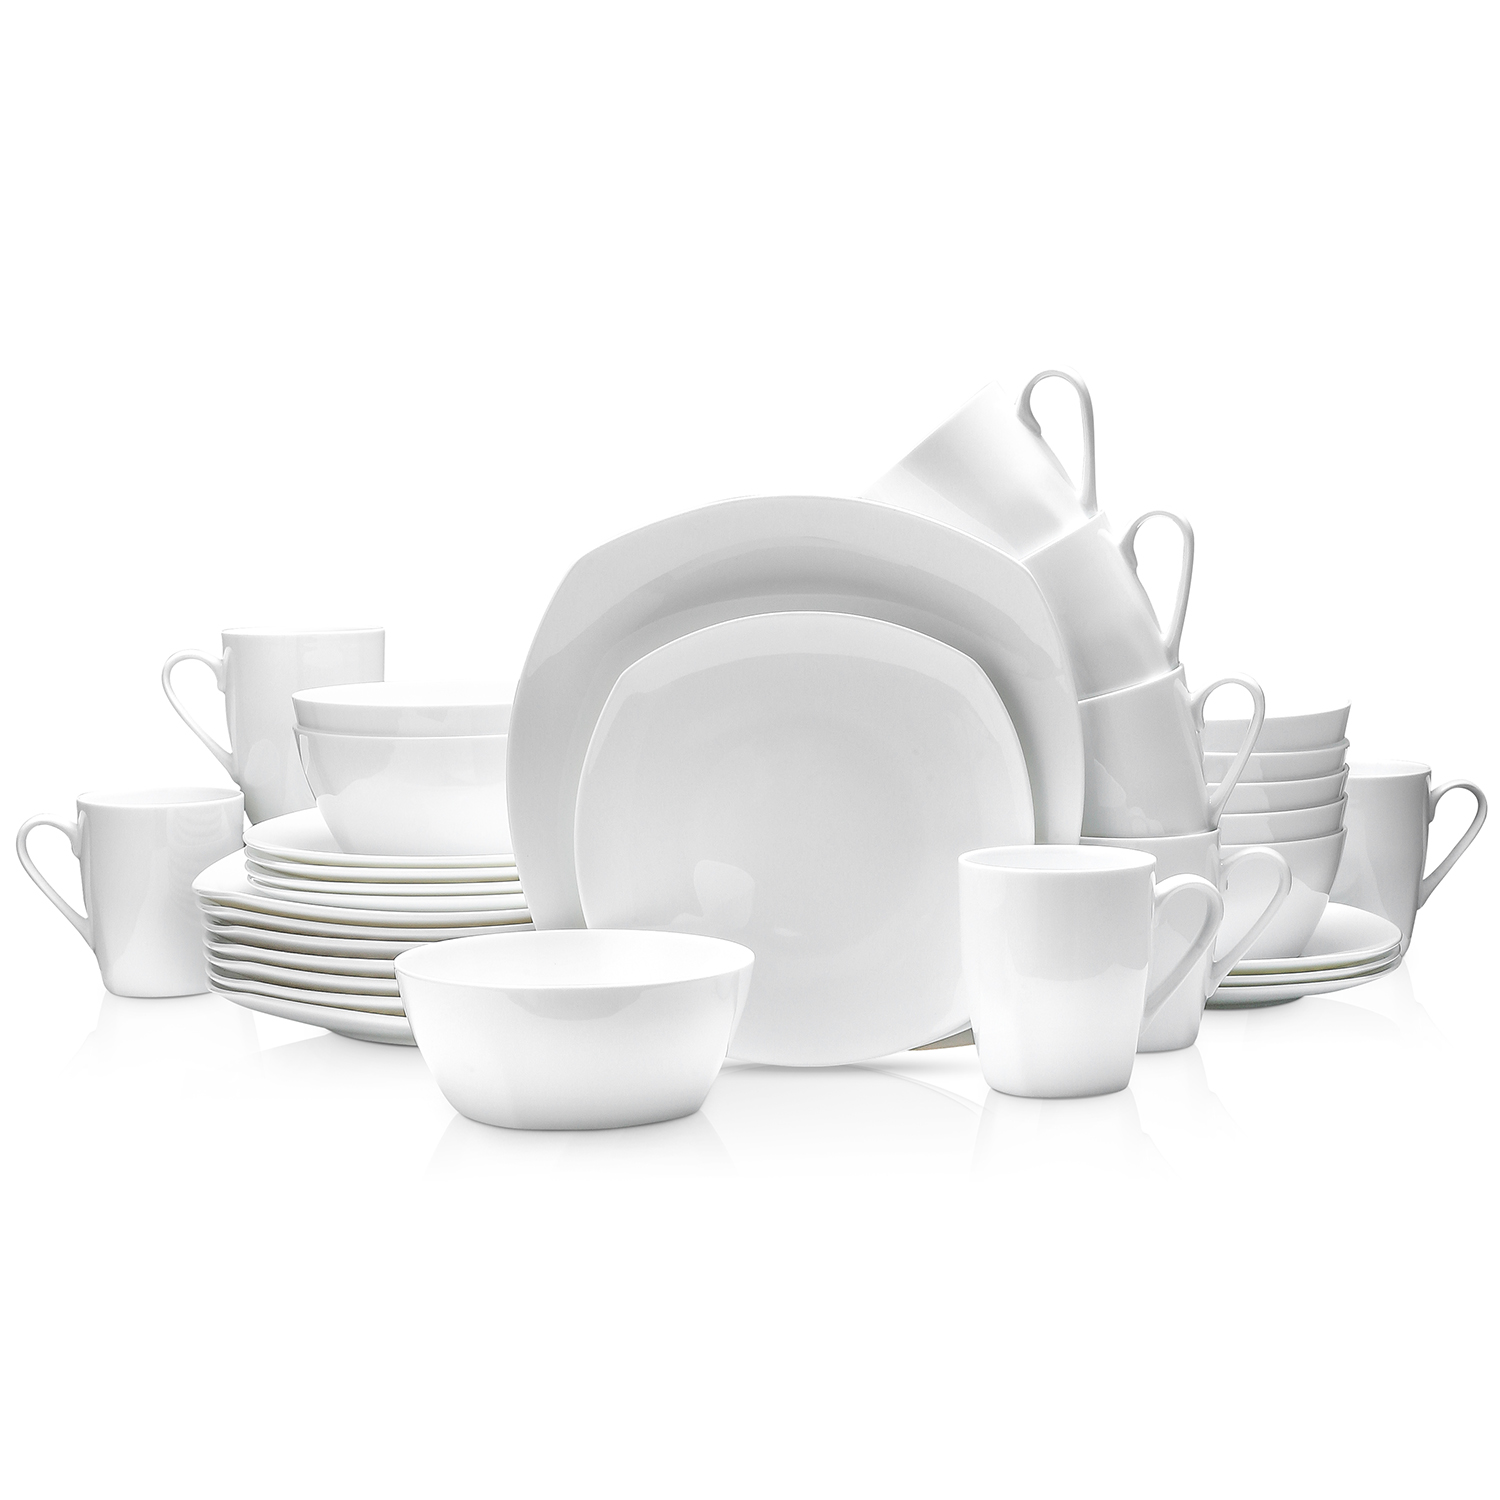 Stone Lain Juliette Bone China Formal Square Dish Set, 32-Piece Dishes for 8, White - image 1 of 6